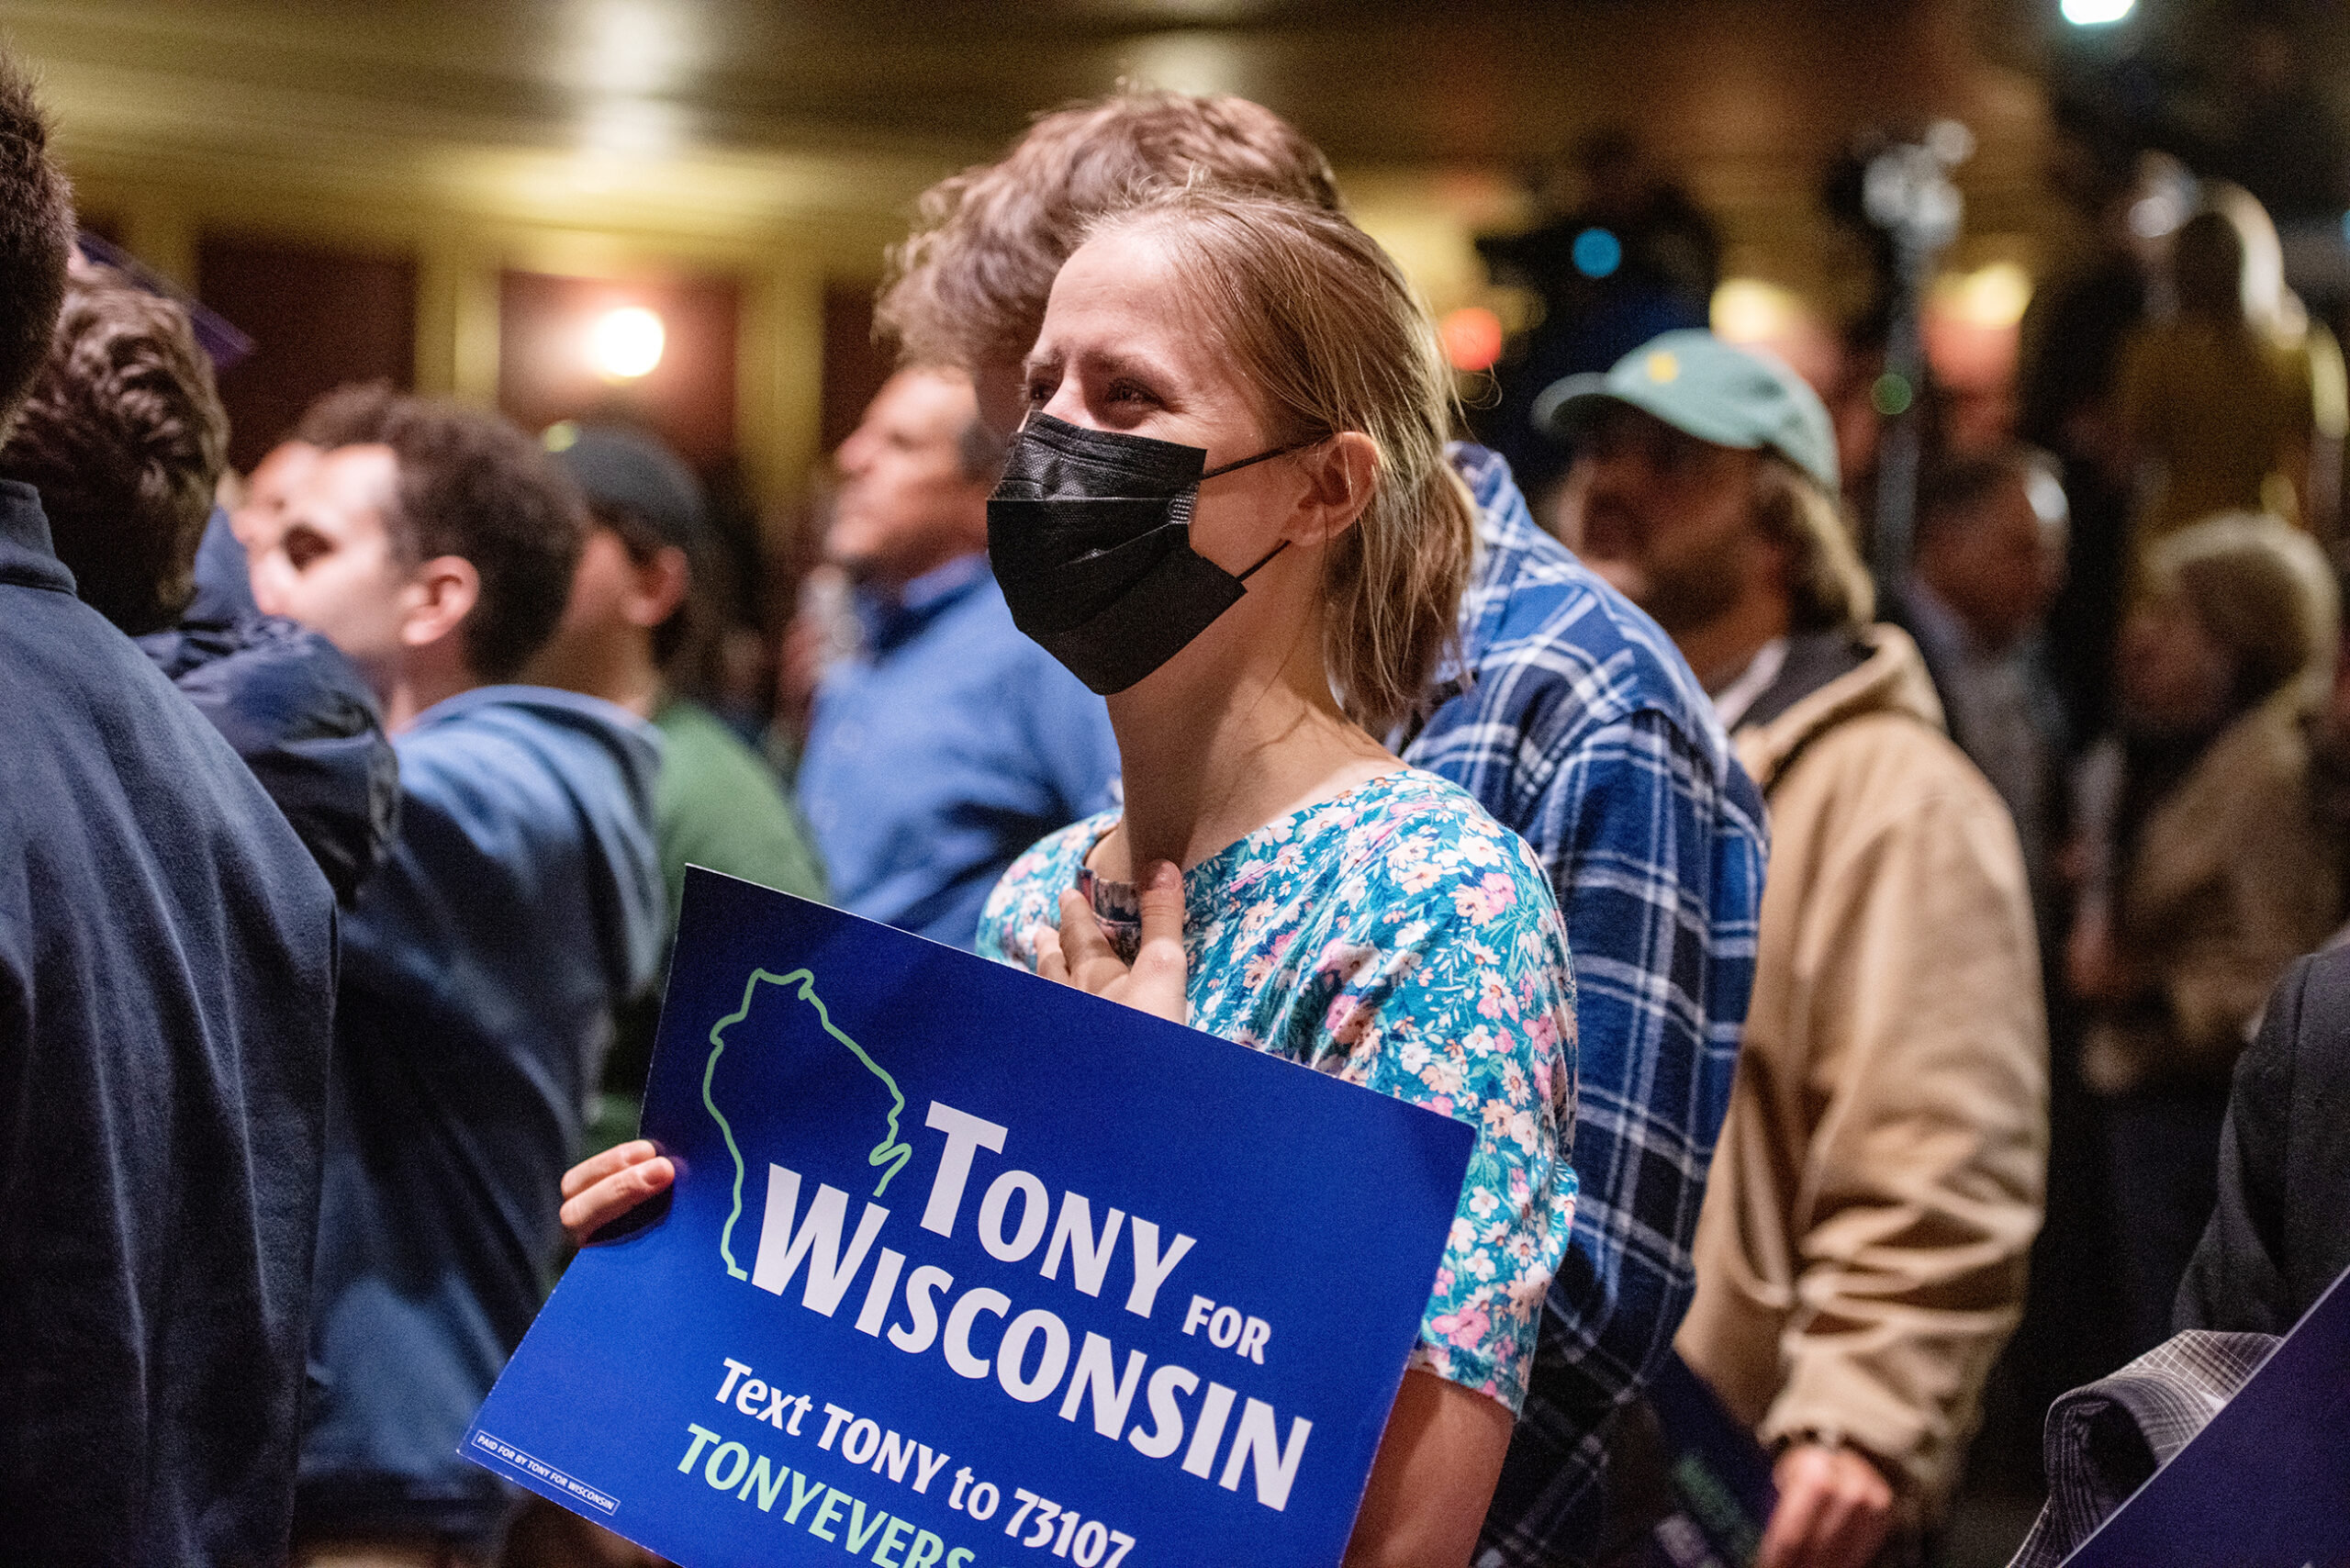 A woman stands with a Tony for Wisconsin sign with a look of relief on her face.